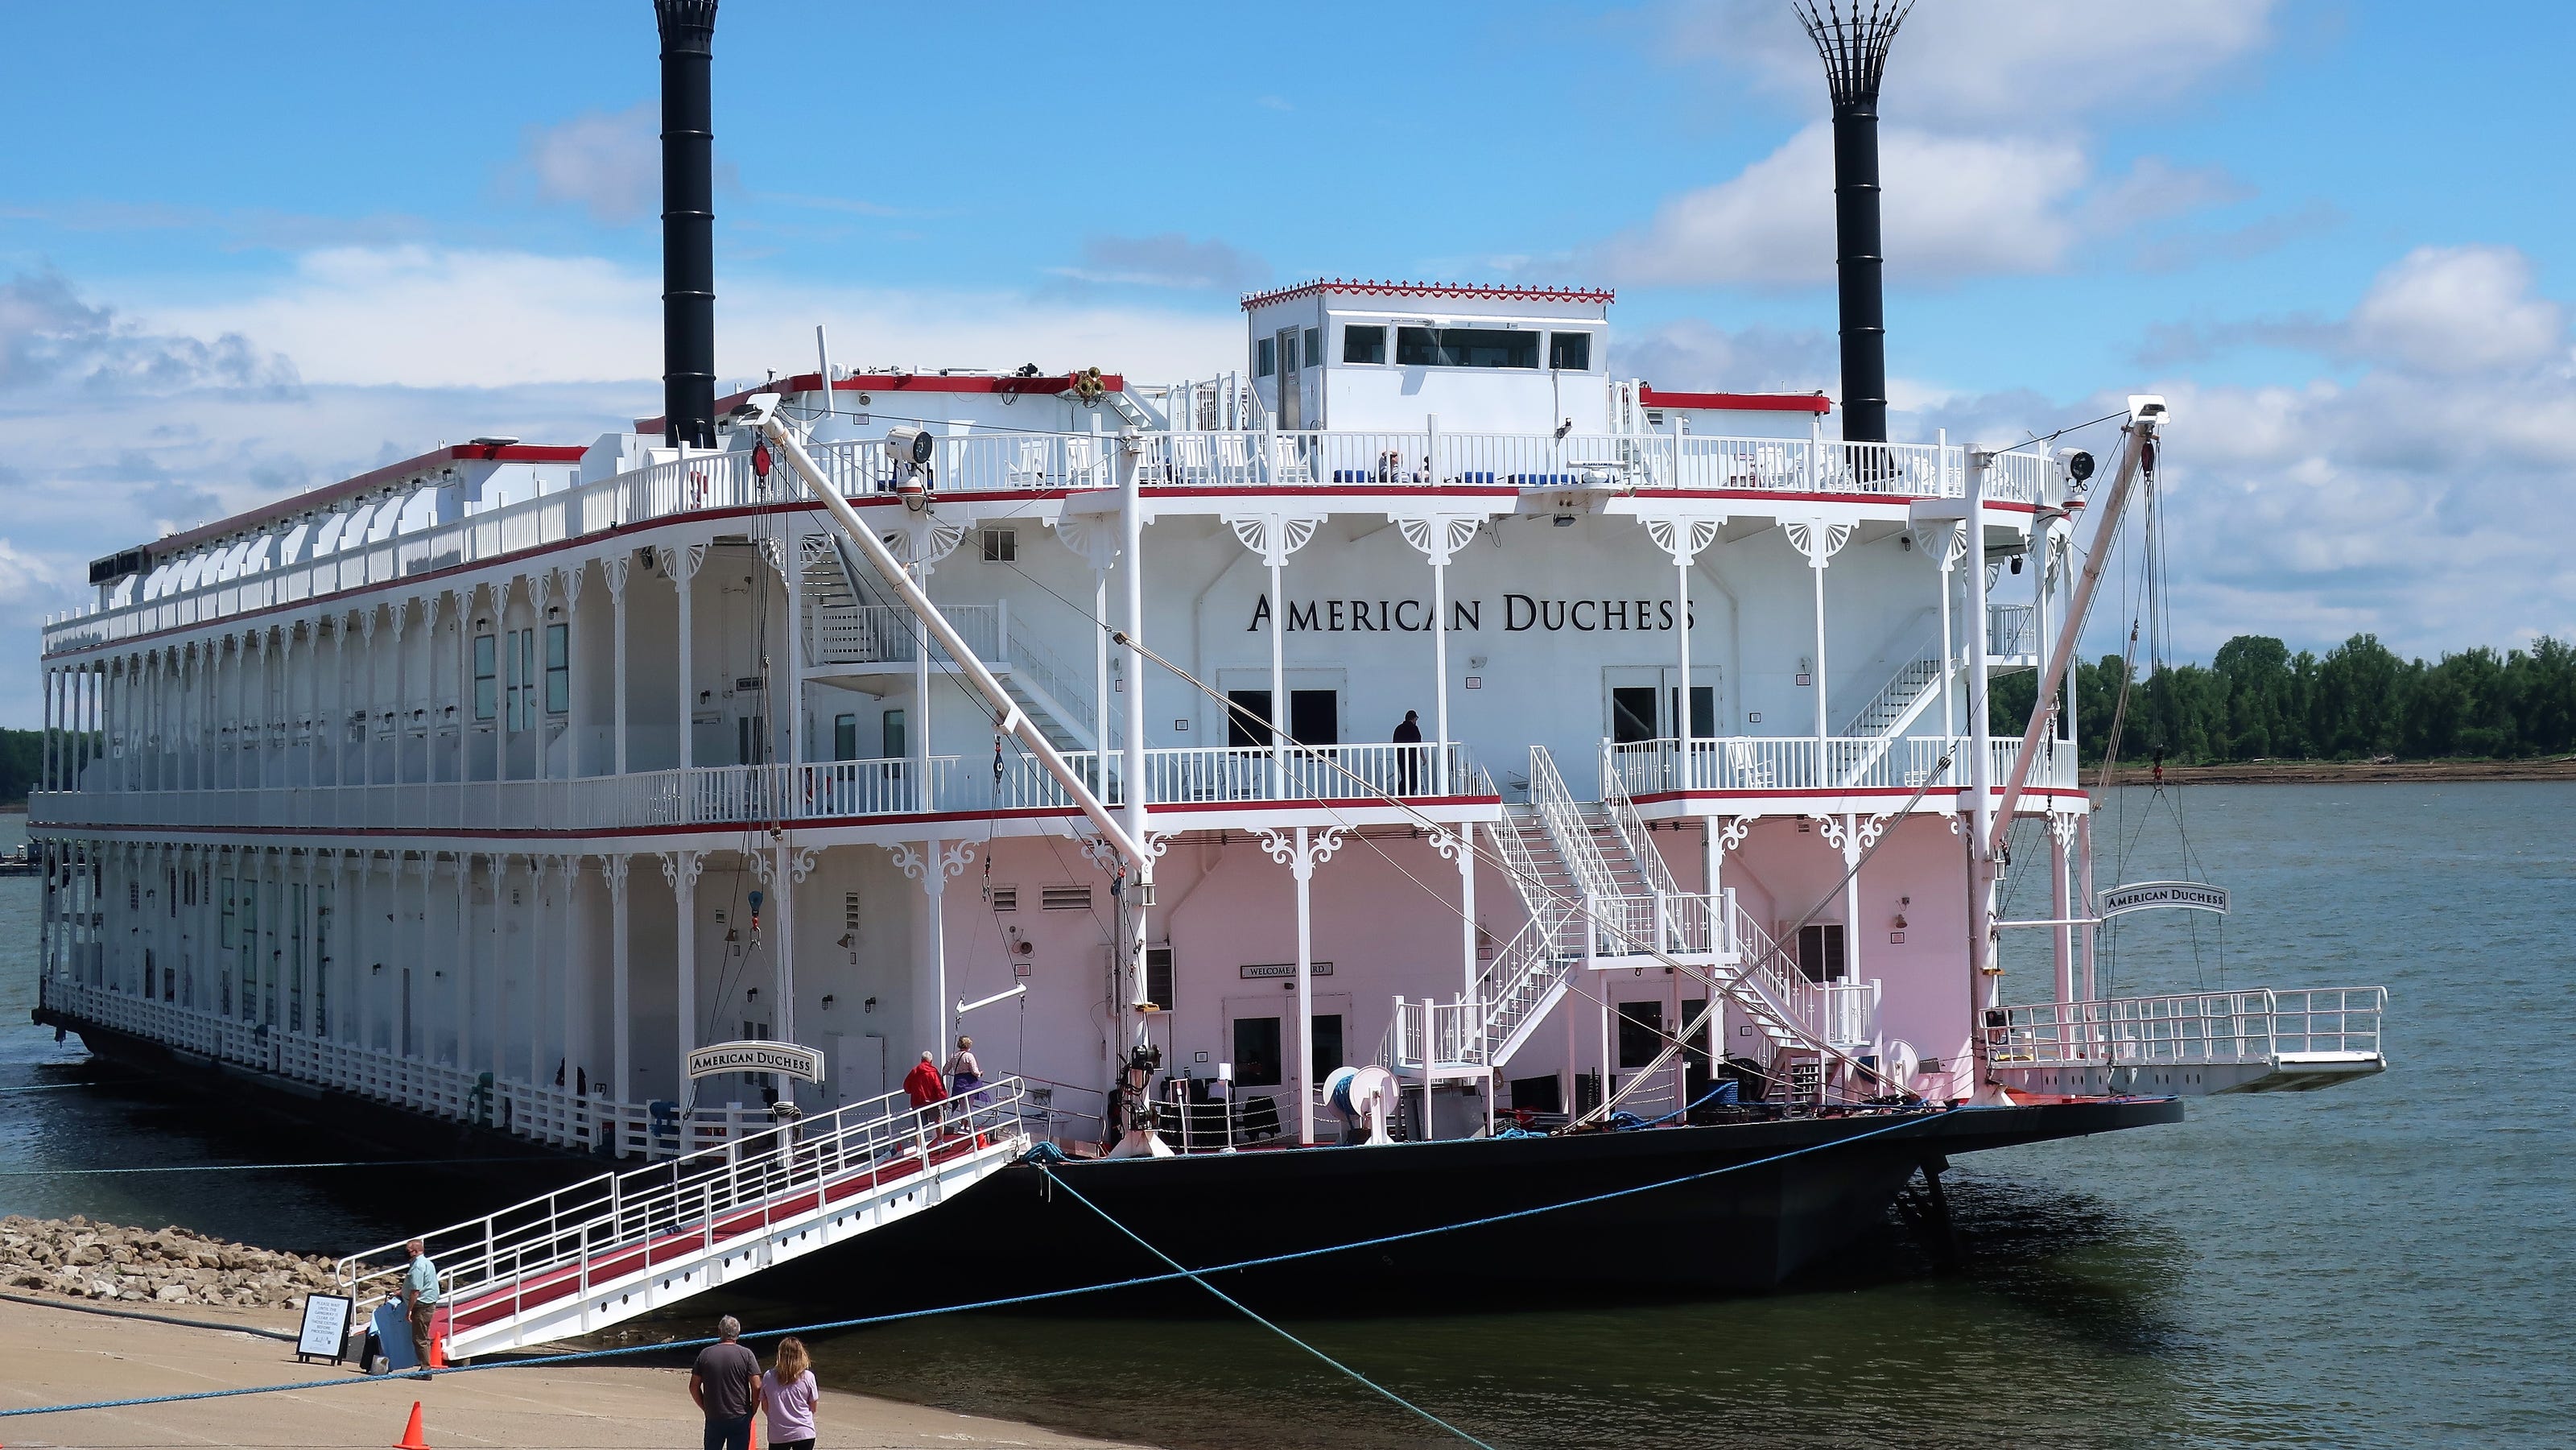 Mississippi River cruises are back Aboard the American Duchess